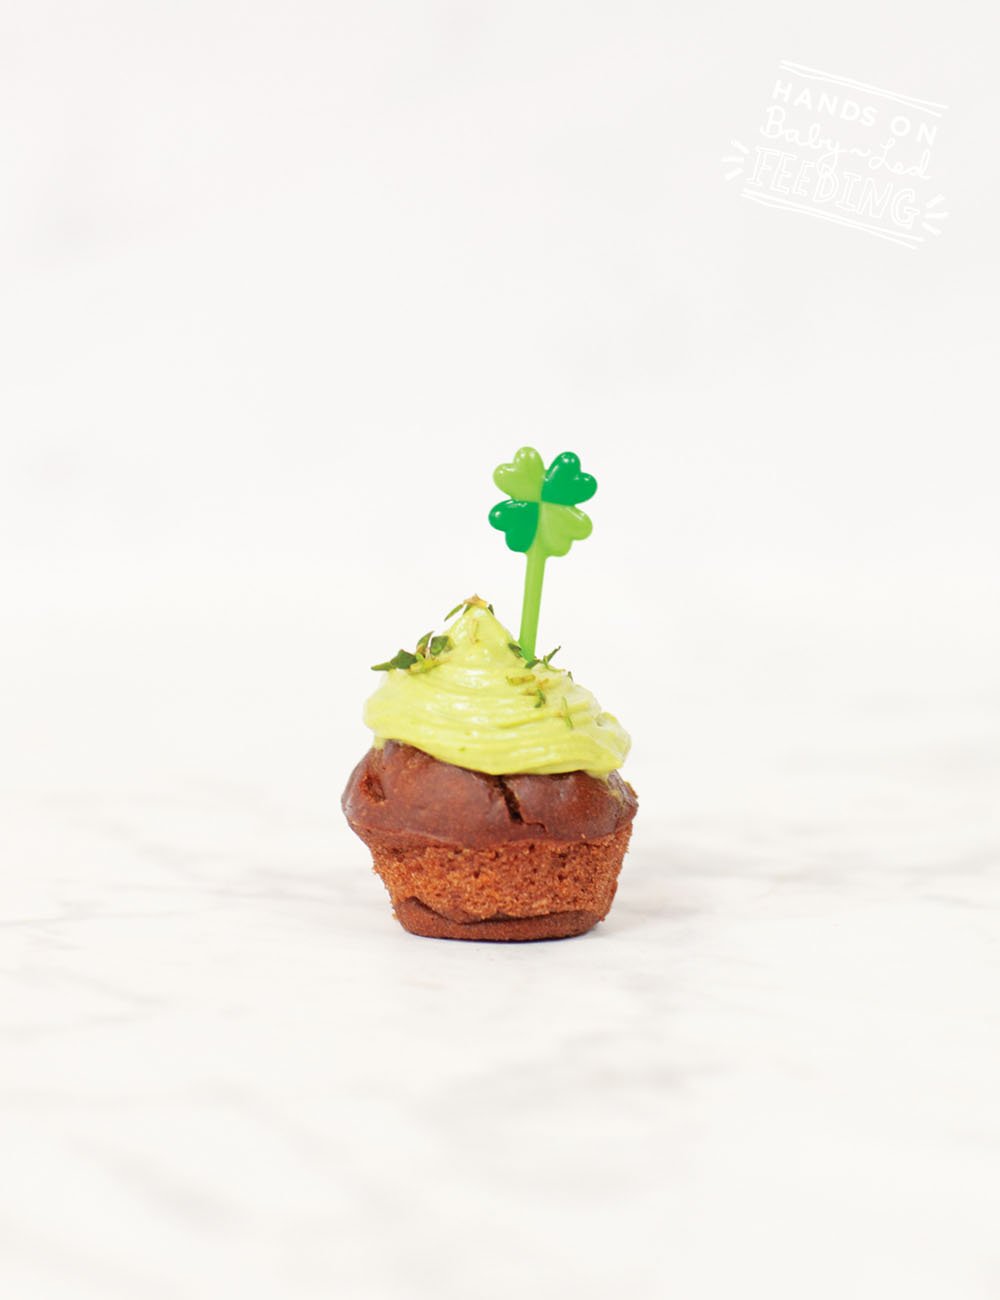 Healthy Brownie Bites for Baby Led Weaning. Refined sugar-free naturally sweetened with bananas! Vegan frosting naturally sweetened and colored! Healthy St. Patrick's Day recipe for kids! #irish #stpatricksday #browniebites #refinedsugarfree #bananas #babyledweaning #babyledfeeding #babyfood #fingerfood #partyfood 